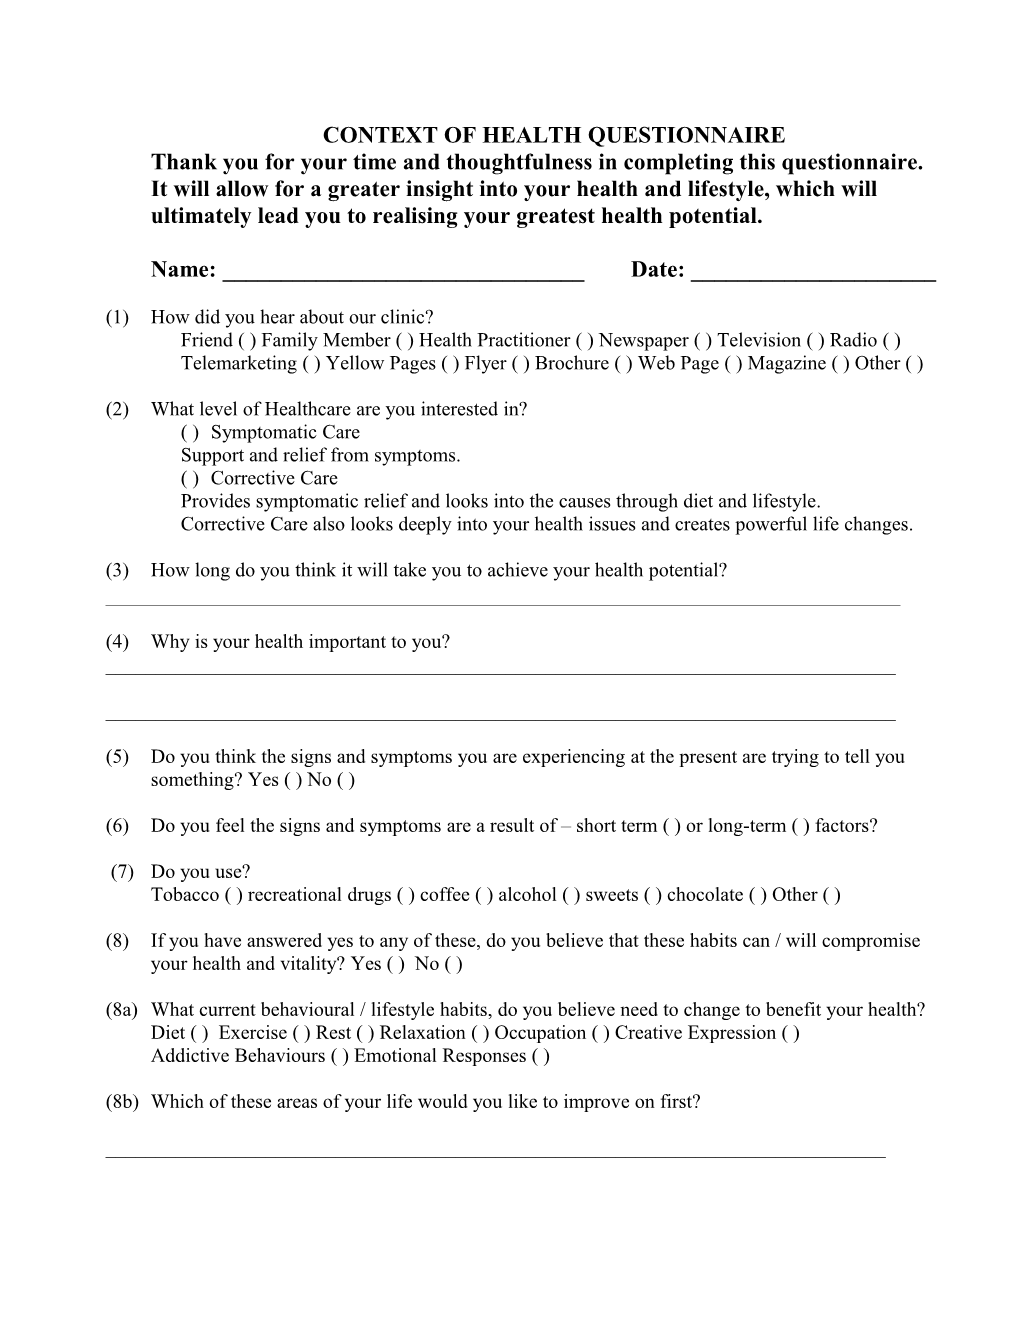 Context of Health Questionnaire